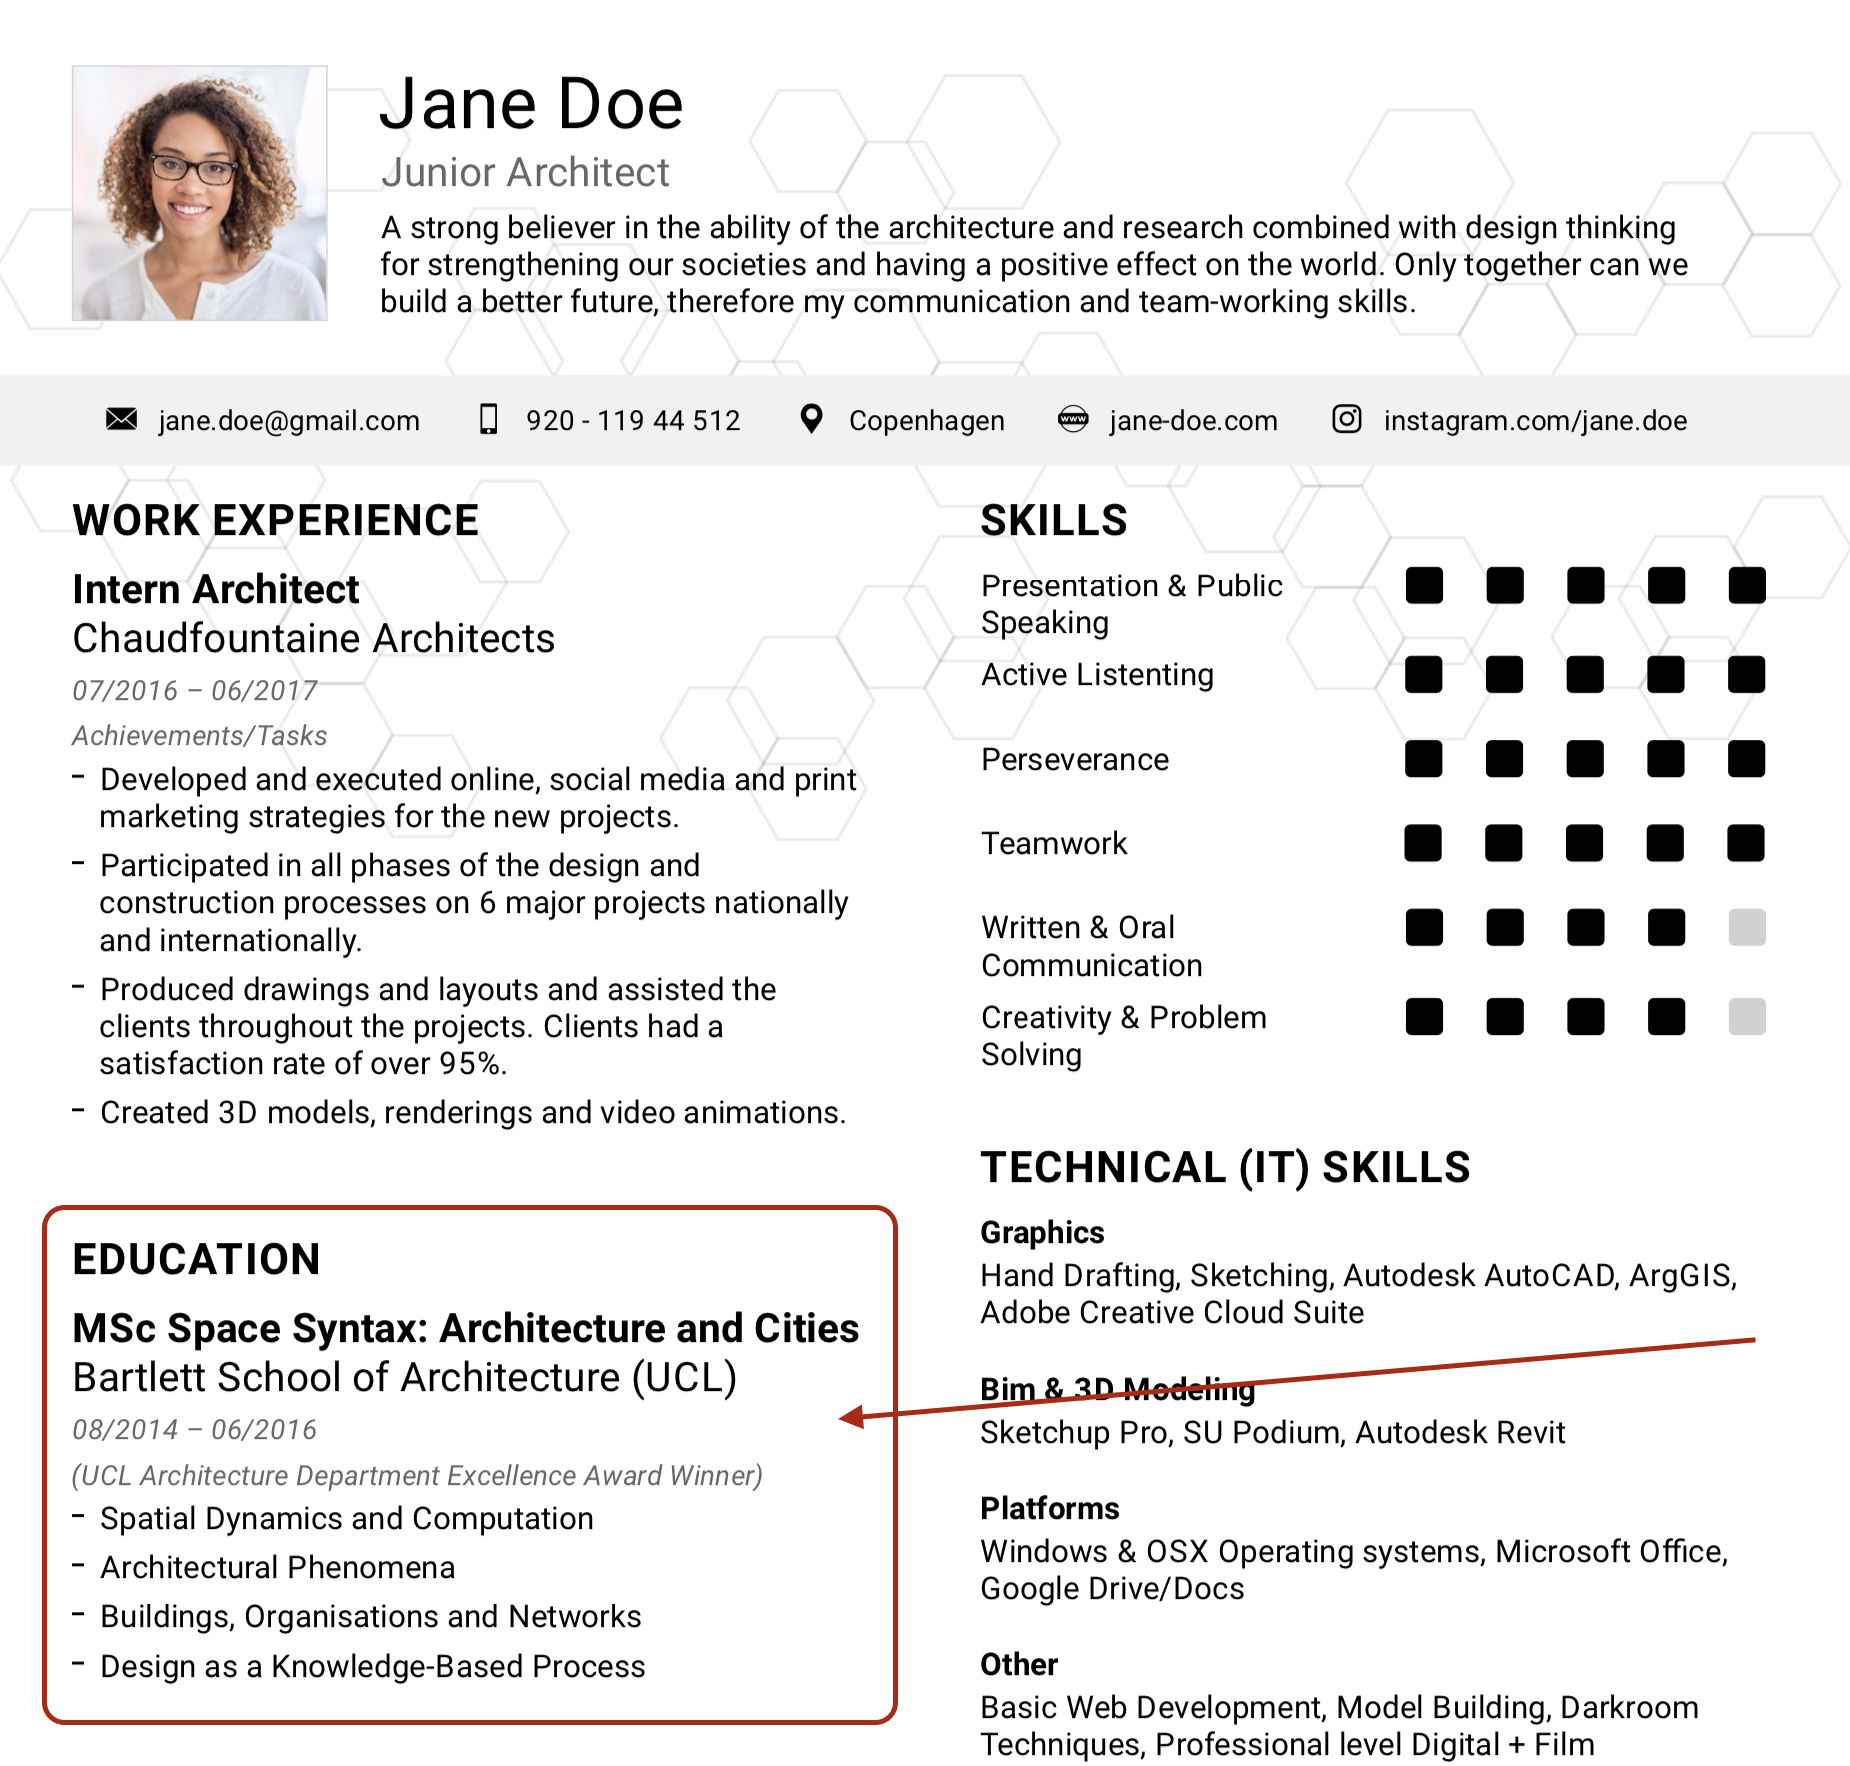 Educational background on a resume example